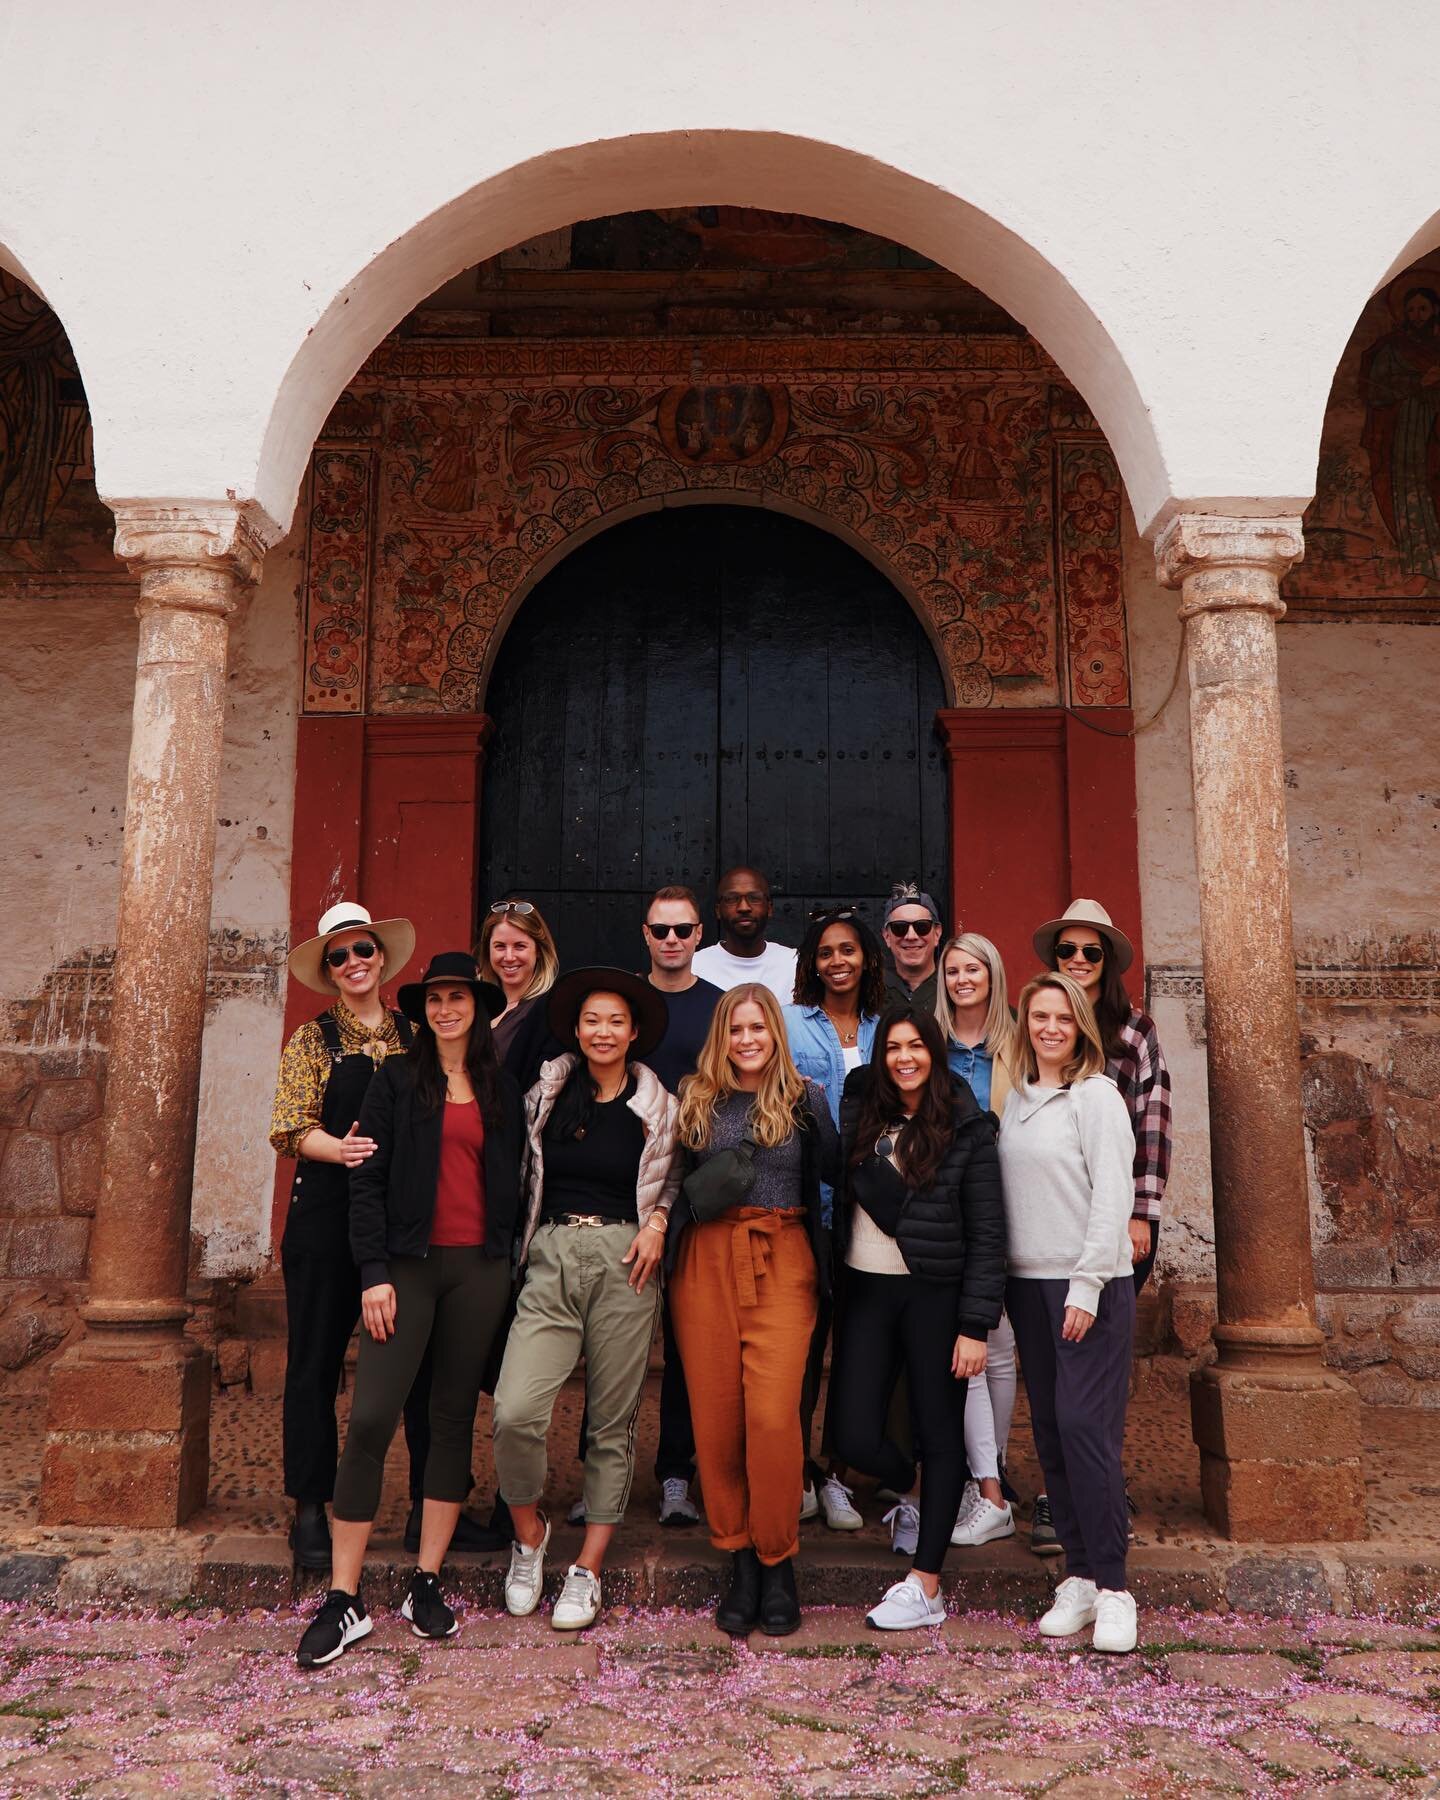 over a year ago, the idea to bring together a handful of our most savvy storytellers @thesmartflyer on a trip tailored around content creation was born. to take the concept + bring it to life took the faith of not just everyone in this picture who jo